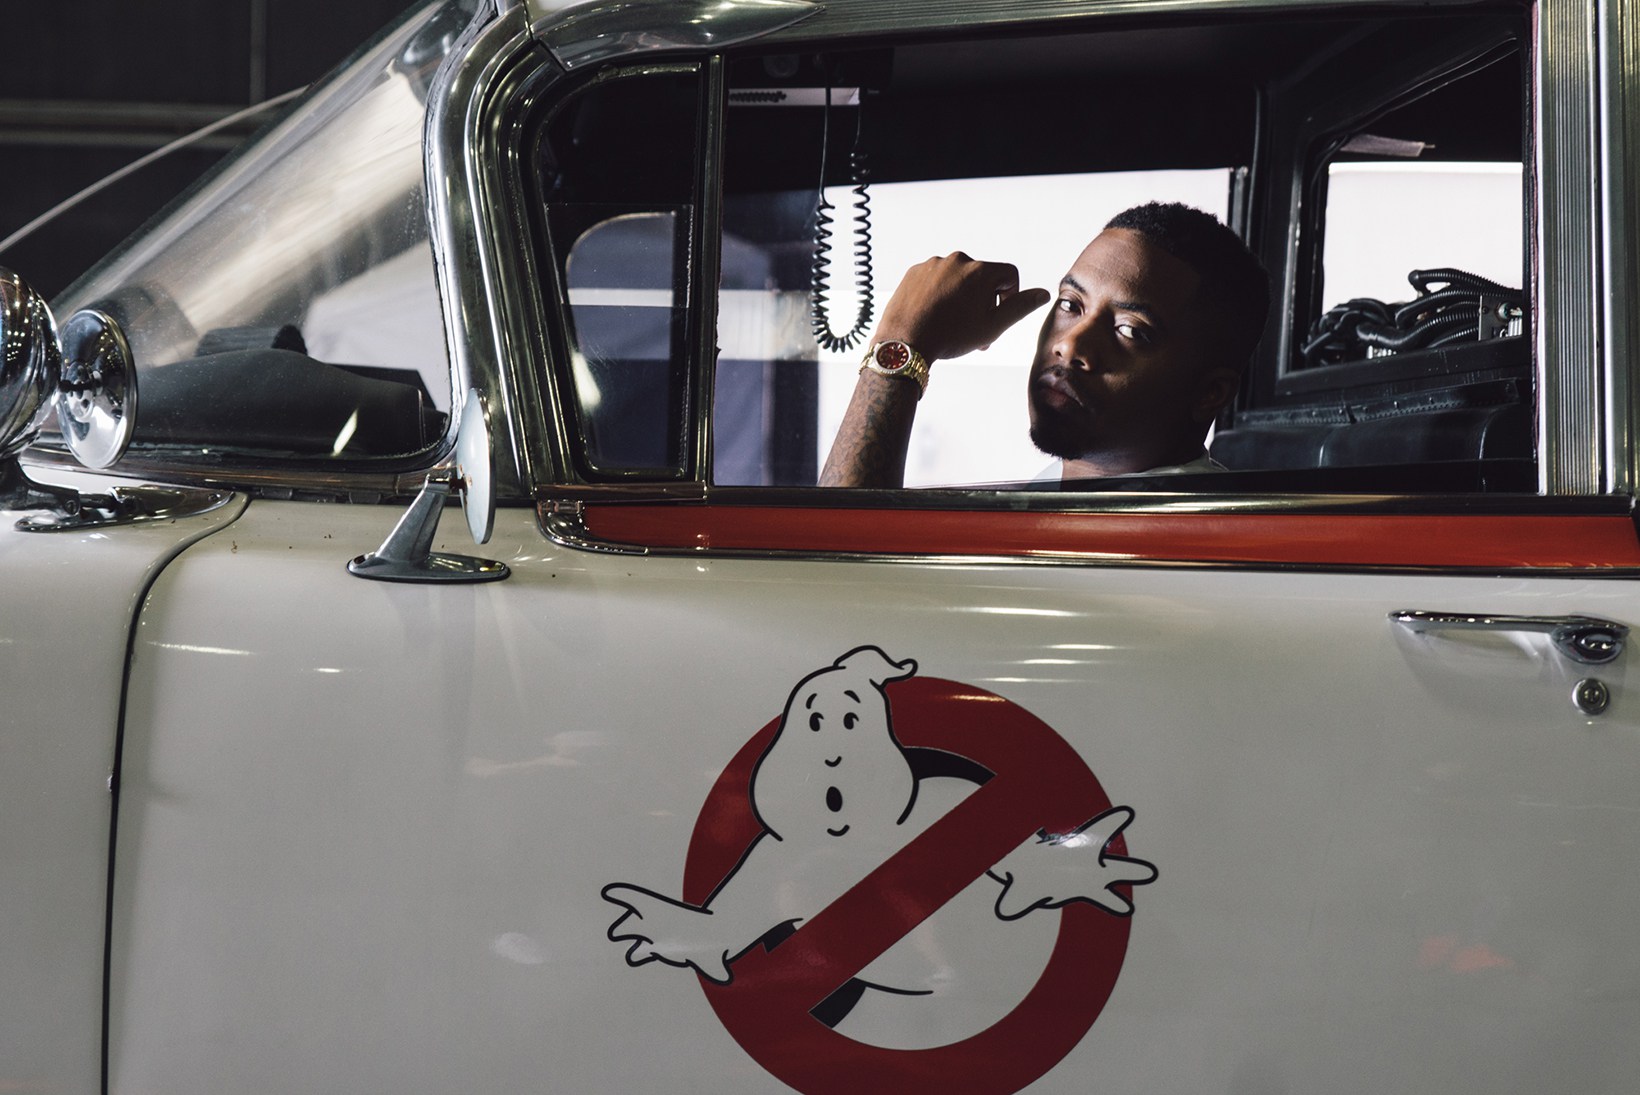 nas-hstry-clothing-ghostbusters-